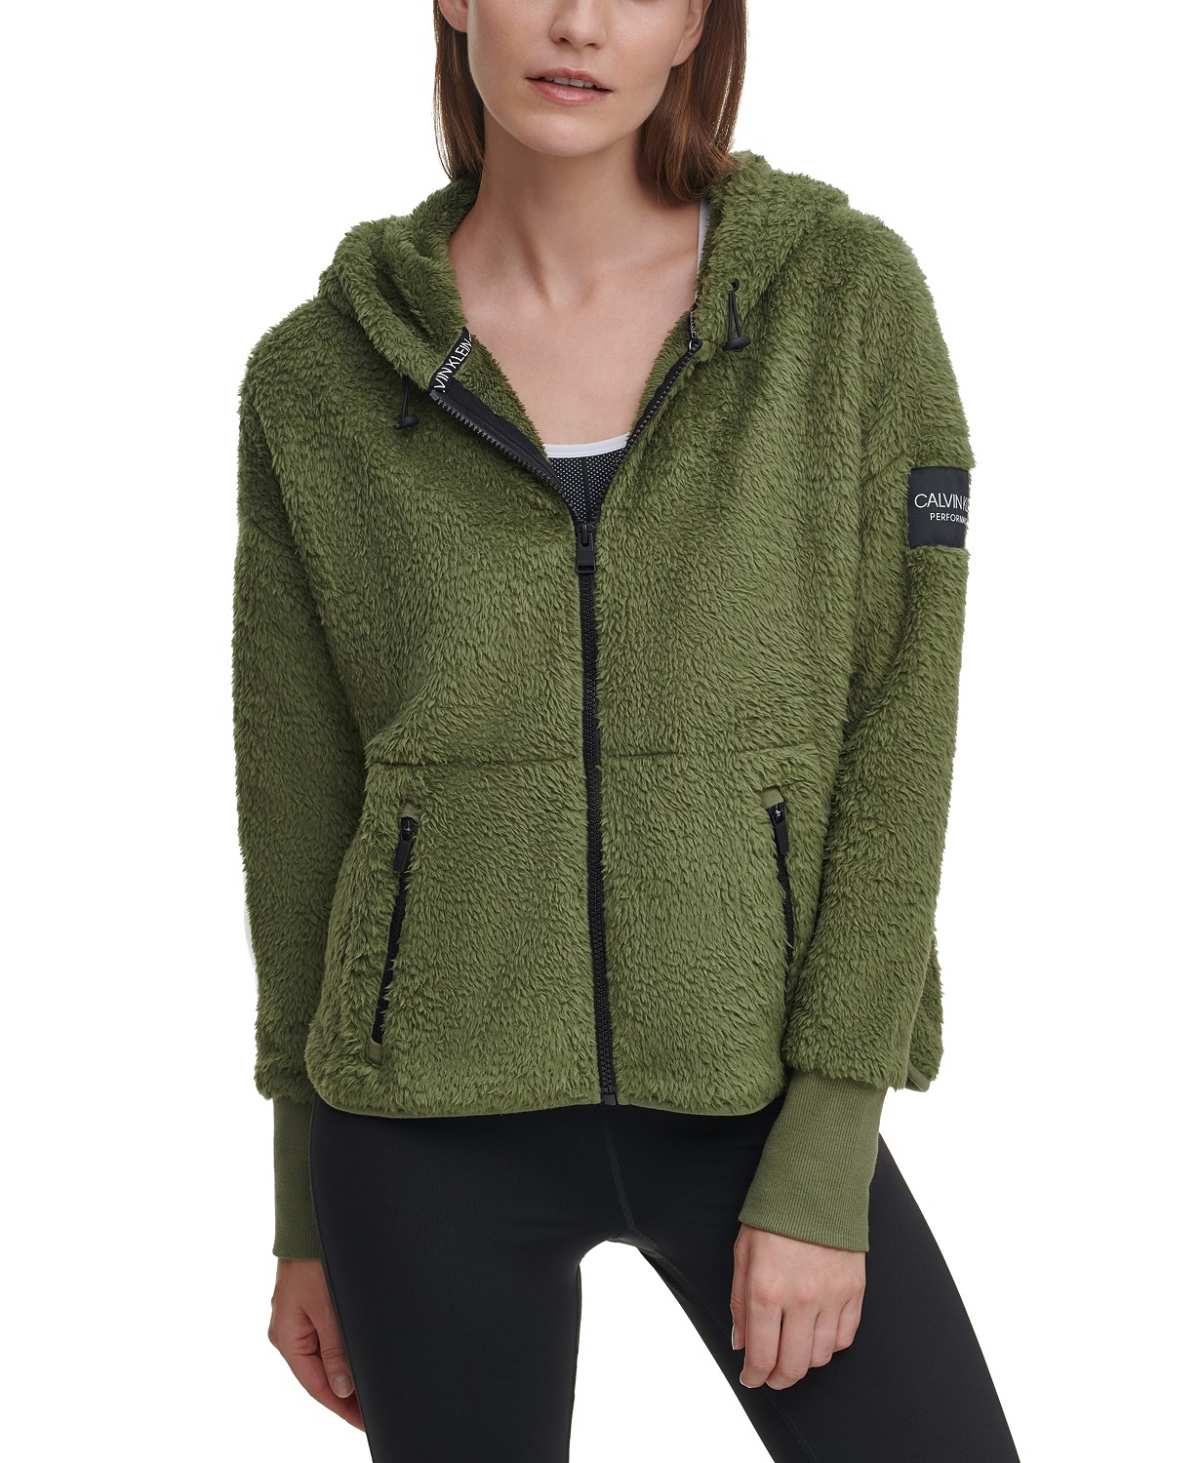 The 21 Best Sherpa Jackets and Hoodies for Women in 2020